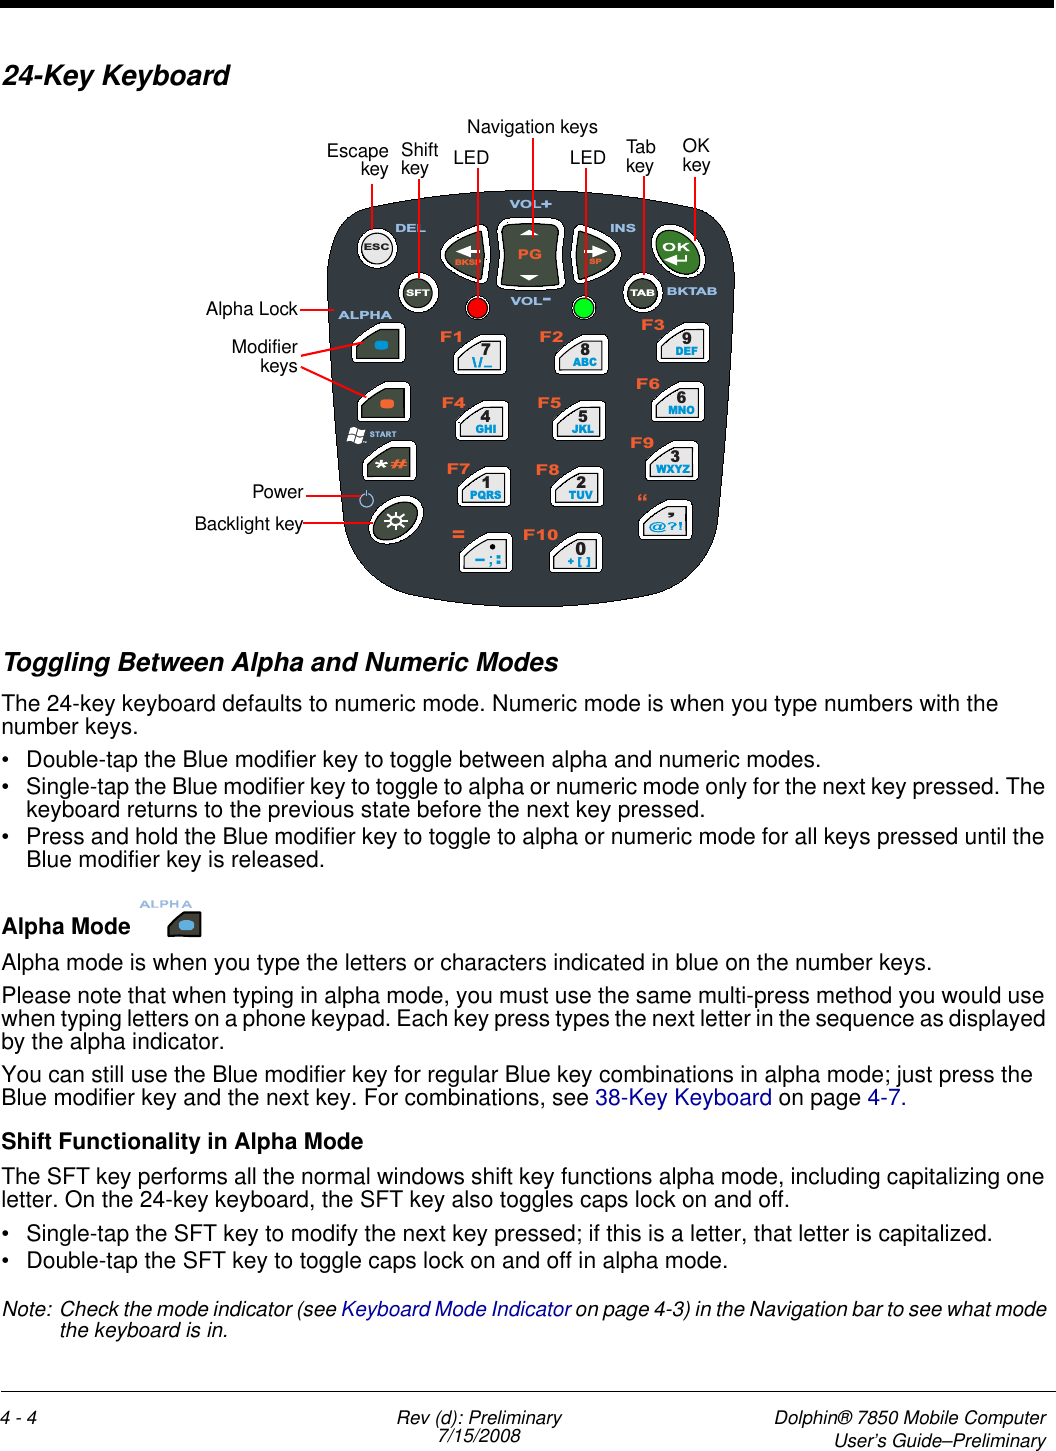 4 - 4 Rev (d): Preliminary7/15/2008 Dolphin® 7850 Mobile ComputerUser’s Guide–Preliminary24-Key KeyboardToggling Between Alpha and Numeric ModesThe 24-key keyboard defaults to numeric mode. Numeric mode is when you type numbers with the number keys. • Double-tap the Blue modifier key to toggle between alpha and numeric modes.• Single-tap the Blue modifier key to toggle to alpha or numeric mode only for the next key pressed. The keyboard returns to the previous state before the next key pressed.• Press and hold the Blue modifier key to toggle to alpha or numeric mode for all keys pressed until the Blue modifier key is released.Alpha Mode Alpha mode is when you type the letters or characters indicated in blue on the number keys.Please note that when typing in alpha mode, you must use the same multi-press method you would use when typing letters on a phone keypad. Each key press types the next letter in the sequence as displayed by the alpha indicator.You can still use the Blue modifier key for regular Blue key combinations in alpha mode; just press the Blue modifier key and the next key. For combinations, see 38-Key Keyboard on page 4-7. Shift Functionality in Alpha ModeThe SFT key performs all the normal windows shift key functions alpha mode, including capitalizing one letter. On the 24-key keyboard, the SFT key also toggles caps lock on and off.• Single-tap the SFT key to modify the next key pressed; if this is a letter, that letter is capitalized.• Double-tap the SFT key to toggle caps lock on and off in alpha mode.Note: Check the mode indicator (see Keyboard Mode Indicator on page 4-3) in the Navigation bar to see what mode the keyboard is in.PGBKSPSPESCTABSFT74GHI1PQRS8ABC5JKL2TUV9DEF6MNO3WXYZ/\ _0+[]:–F1 F2F3F4 F5F6F7 F8F9F10VOL+DEL INSBKTABSTARTVOL-ALPHA“=PowerBacklight keyModifierkeysAlpha LockEscapekeyOK keyNavigation keys Tab keyShift key LED LED